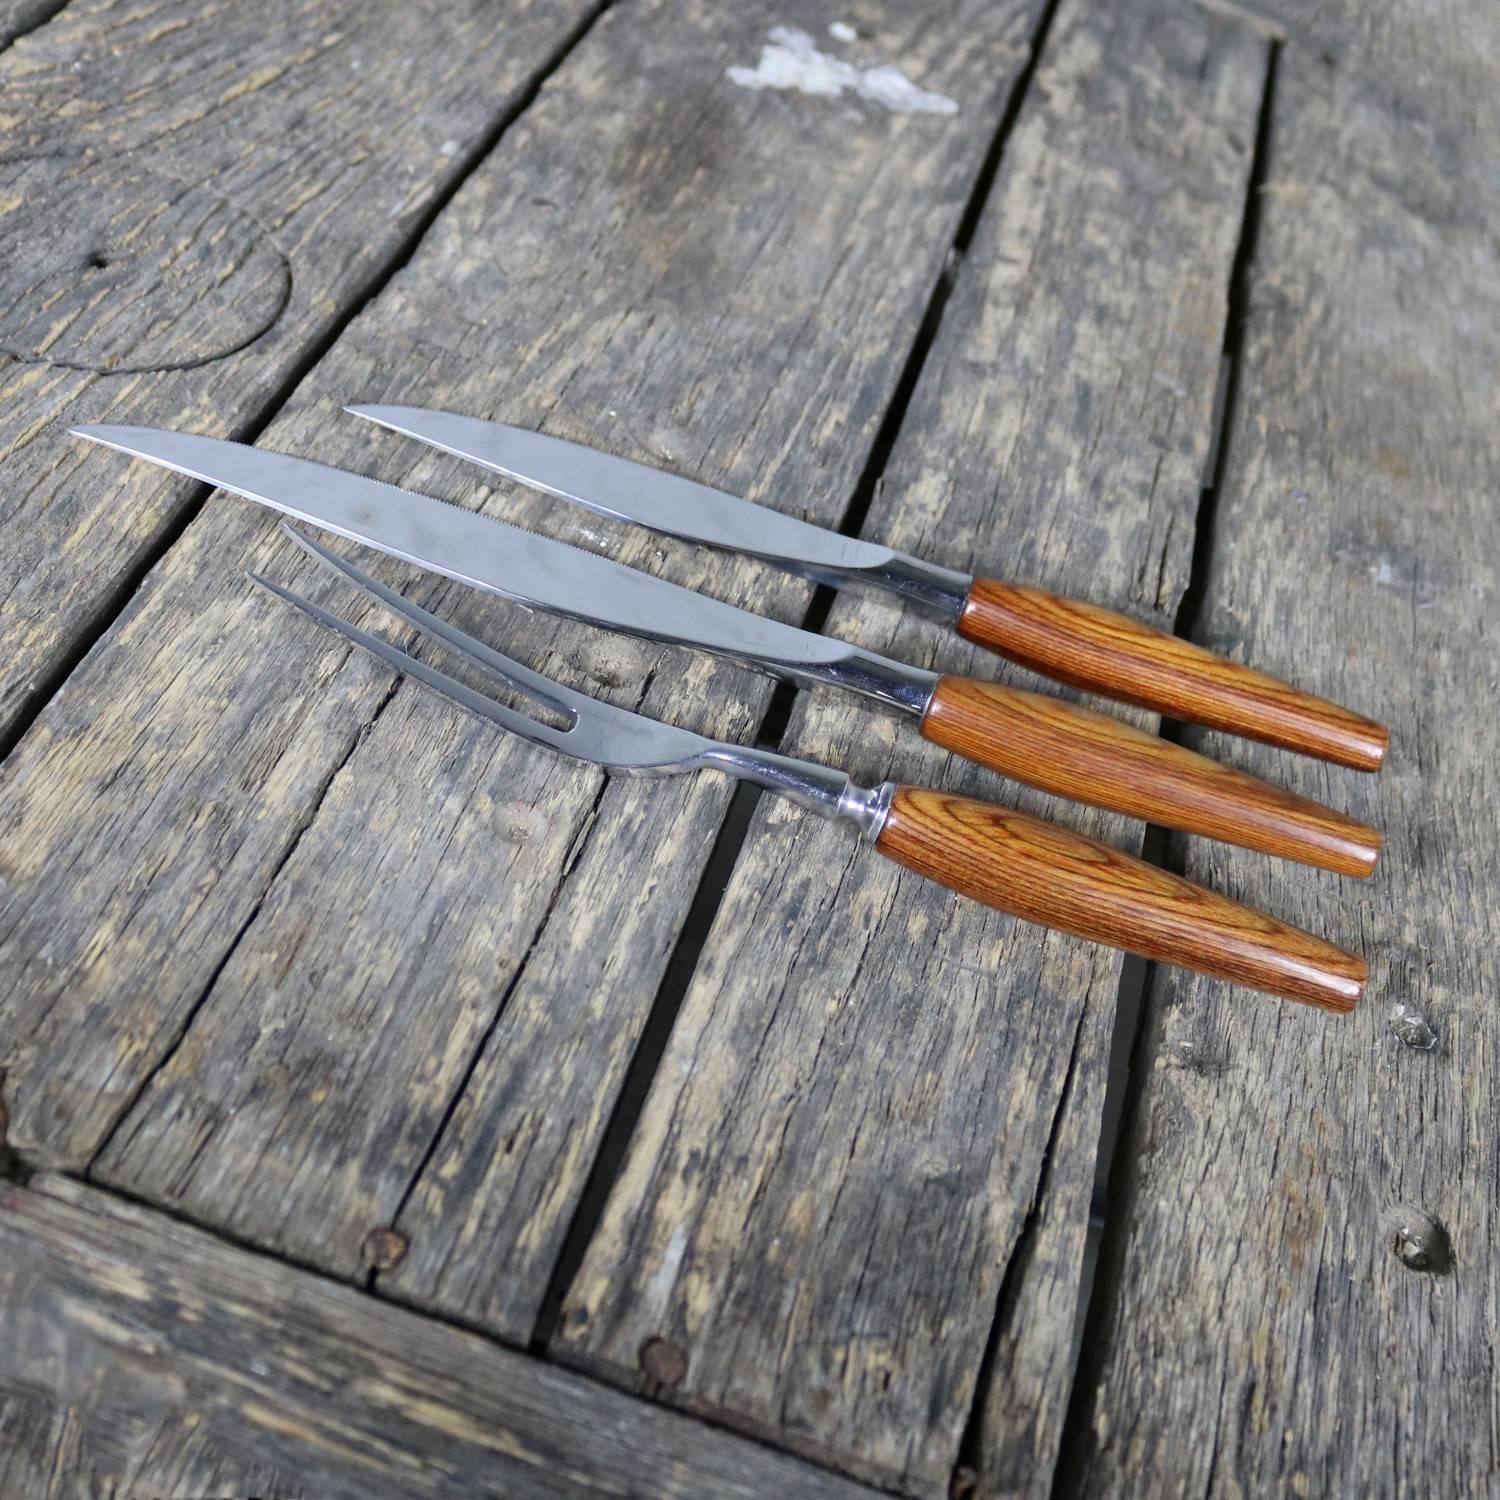 Stainless Steel Regent Sheffield Cutlery Teak and Stainless Mode Danish Steak Knives and Serving